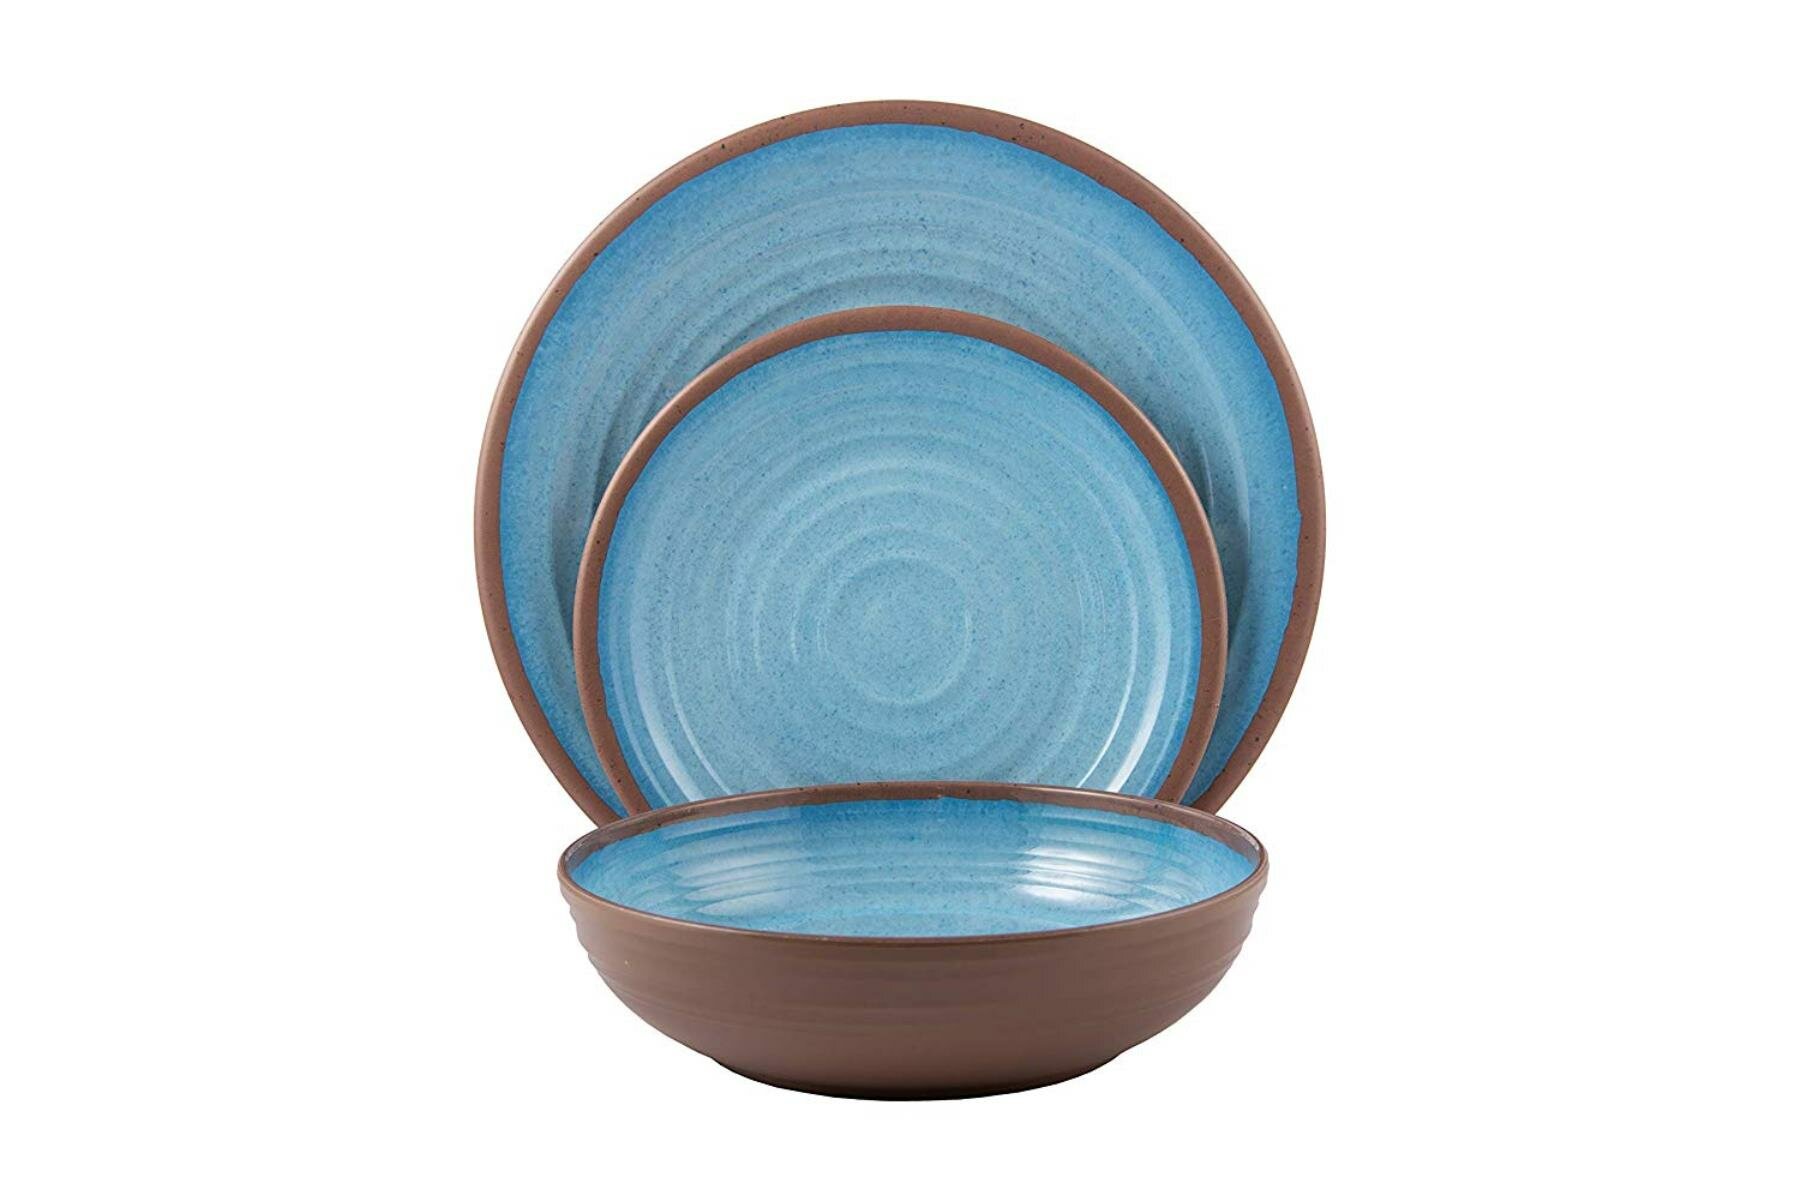 Melange 36-Piece 100/% Melamine Dinnerware Set Dinner Plate Color: Multicolor 12 Each Salad Plate /& Soup Bowl | Shatter-Proof and Chip-Resistant Melamine Plates and Bowls Clay Collection